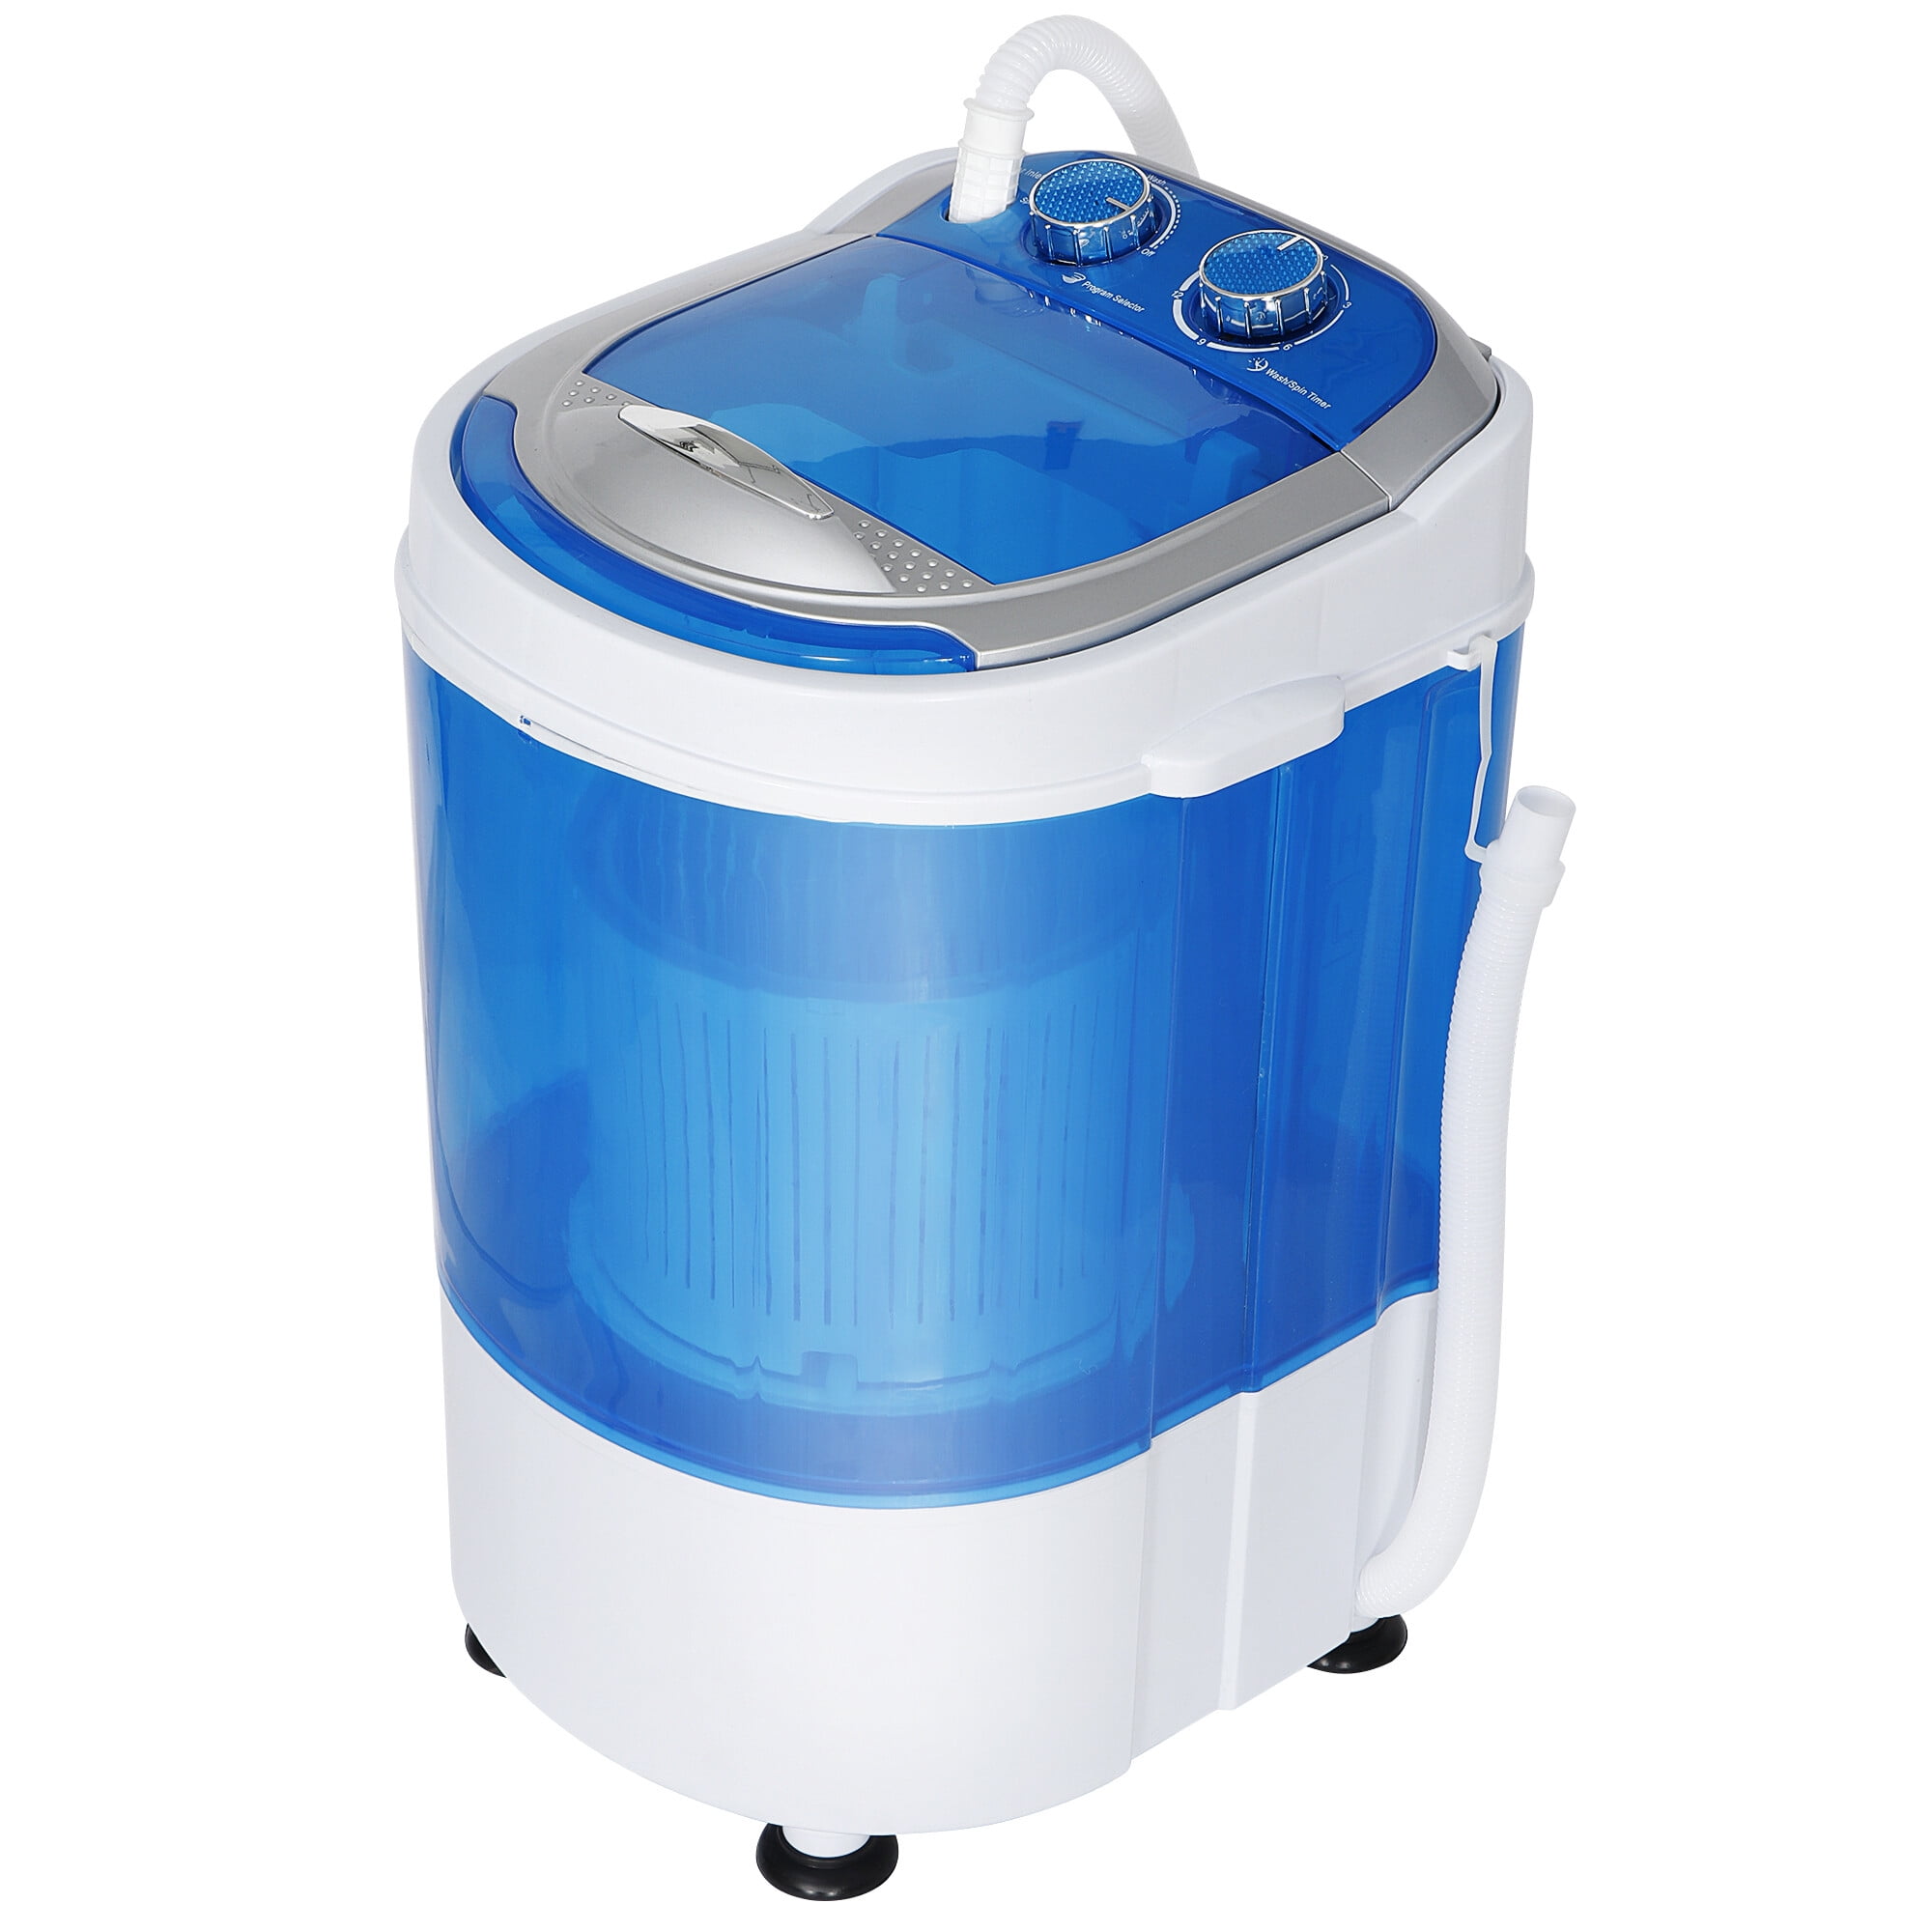 New MiniWash Compact: Your Portable Washer Machine Solution